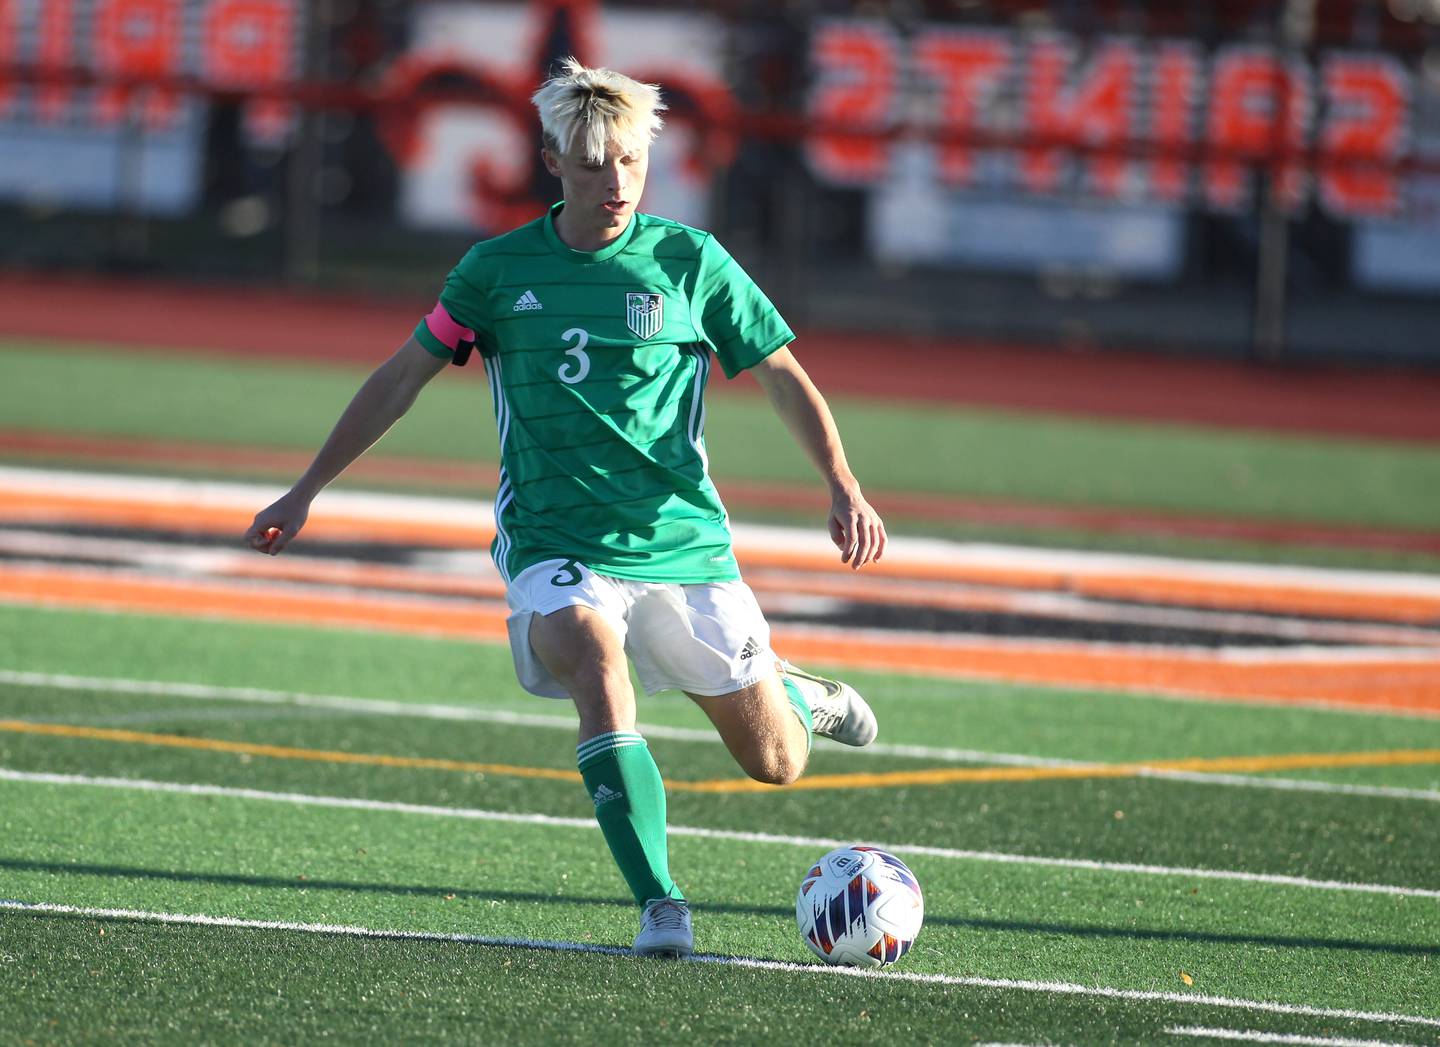 York’s Ryder Kohl kicks the ball during their Class 3A St. Charles East Sectional semifinal game against Addison Trail on Wednesday, Oct. 26, 2022.